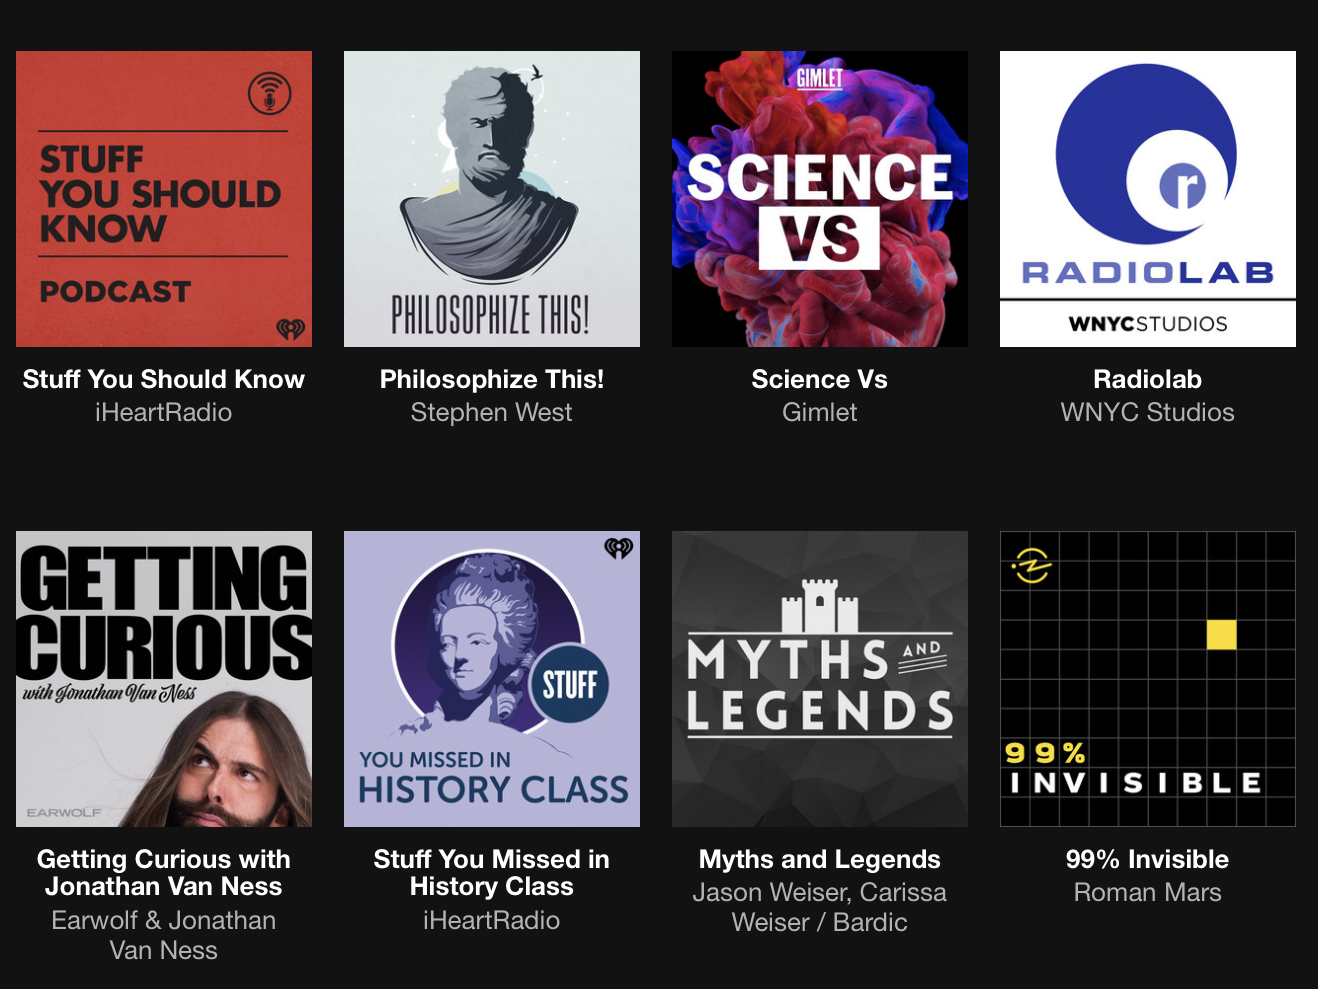 biggest spotify podcasts